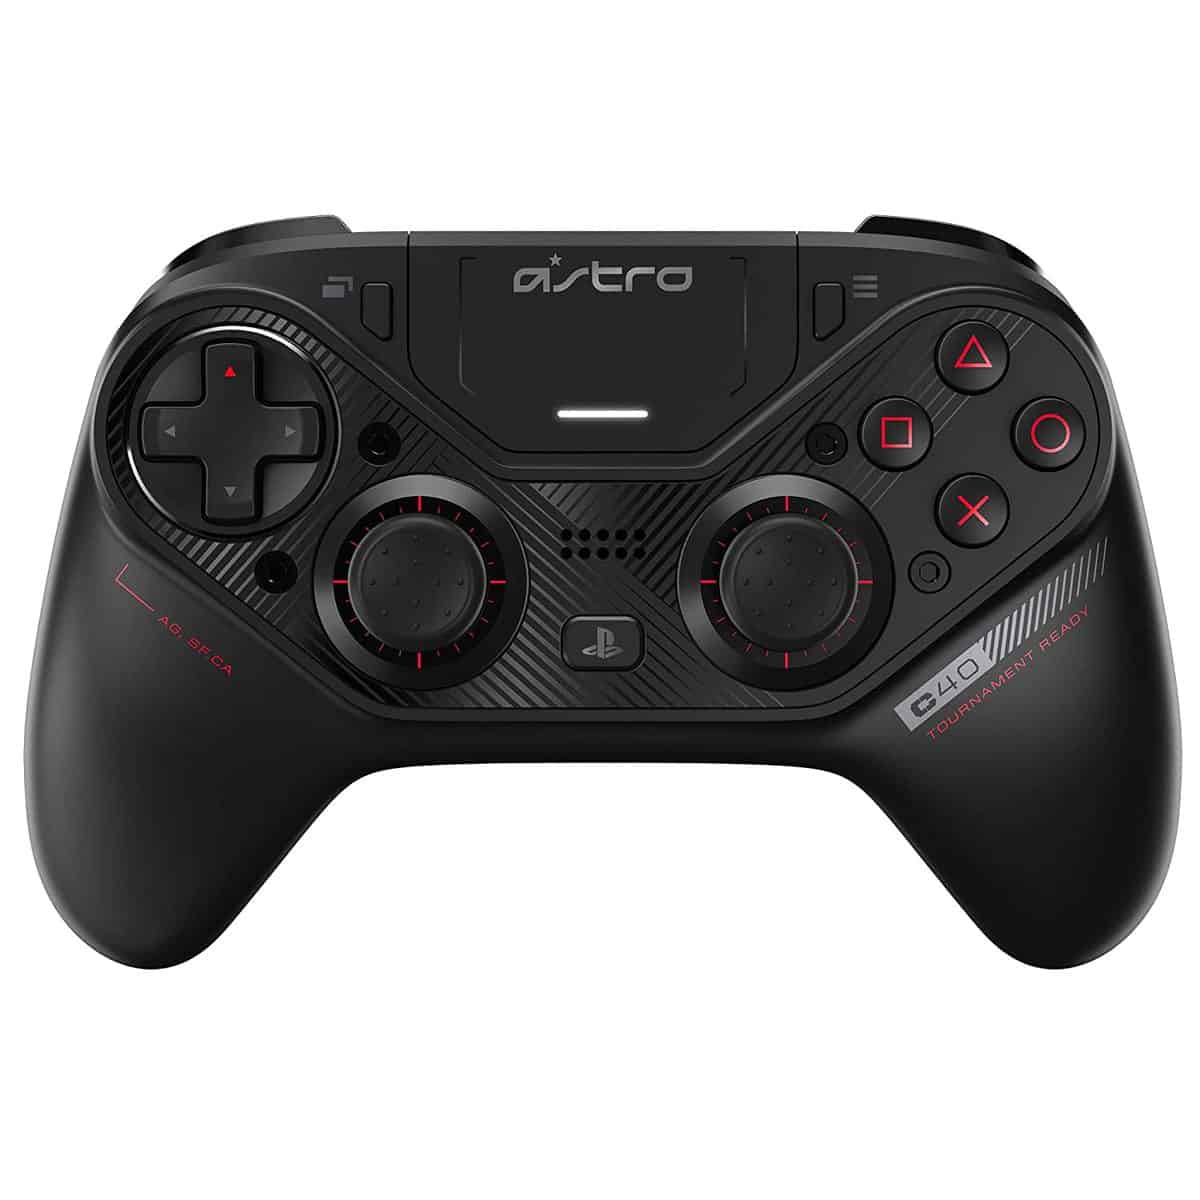 Best High-End Controller for PC